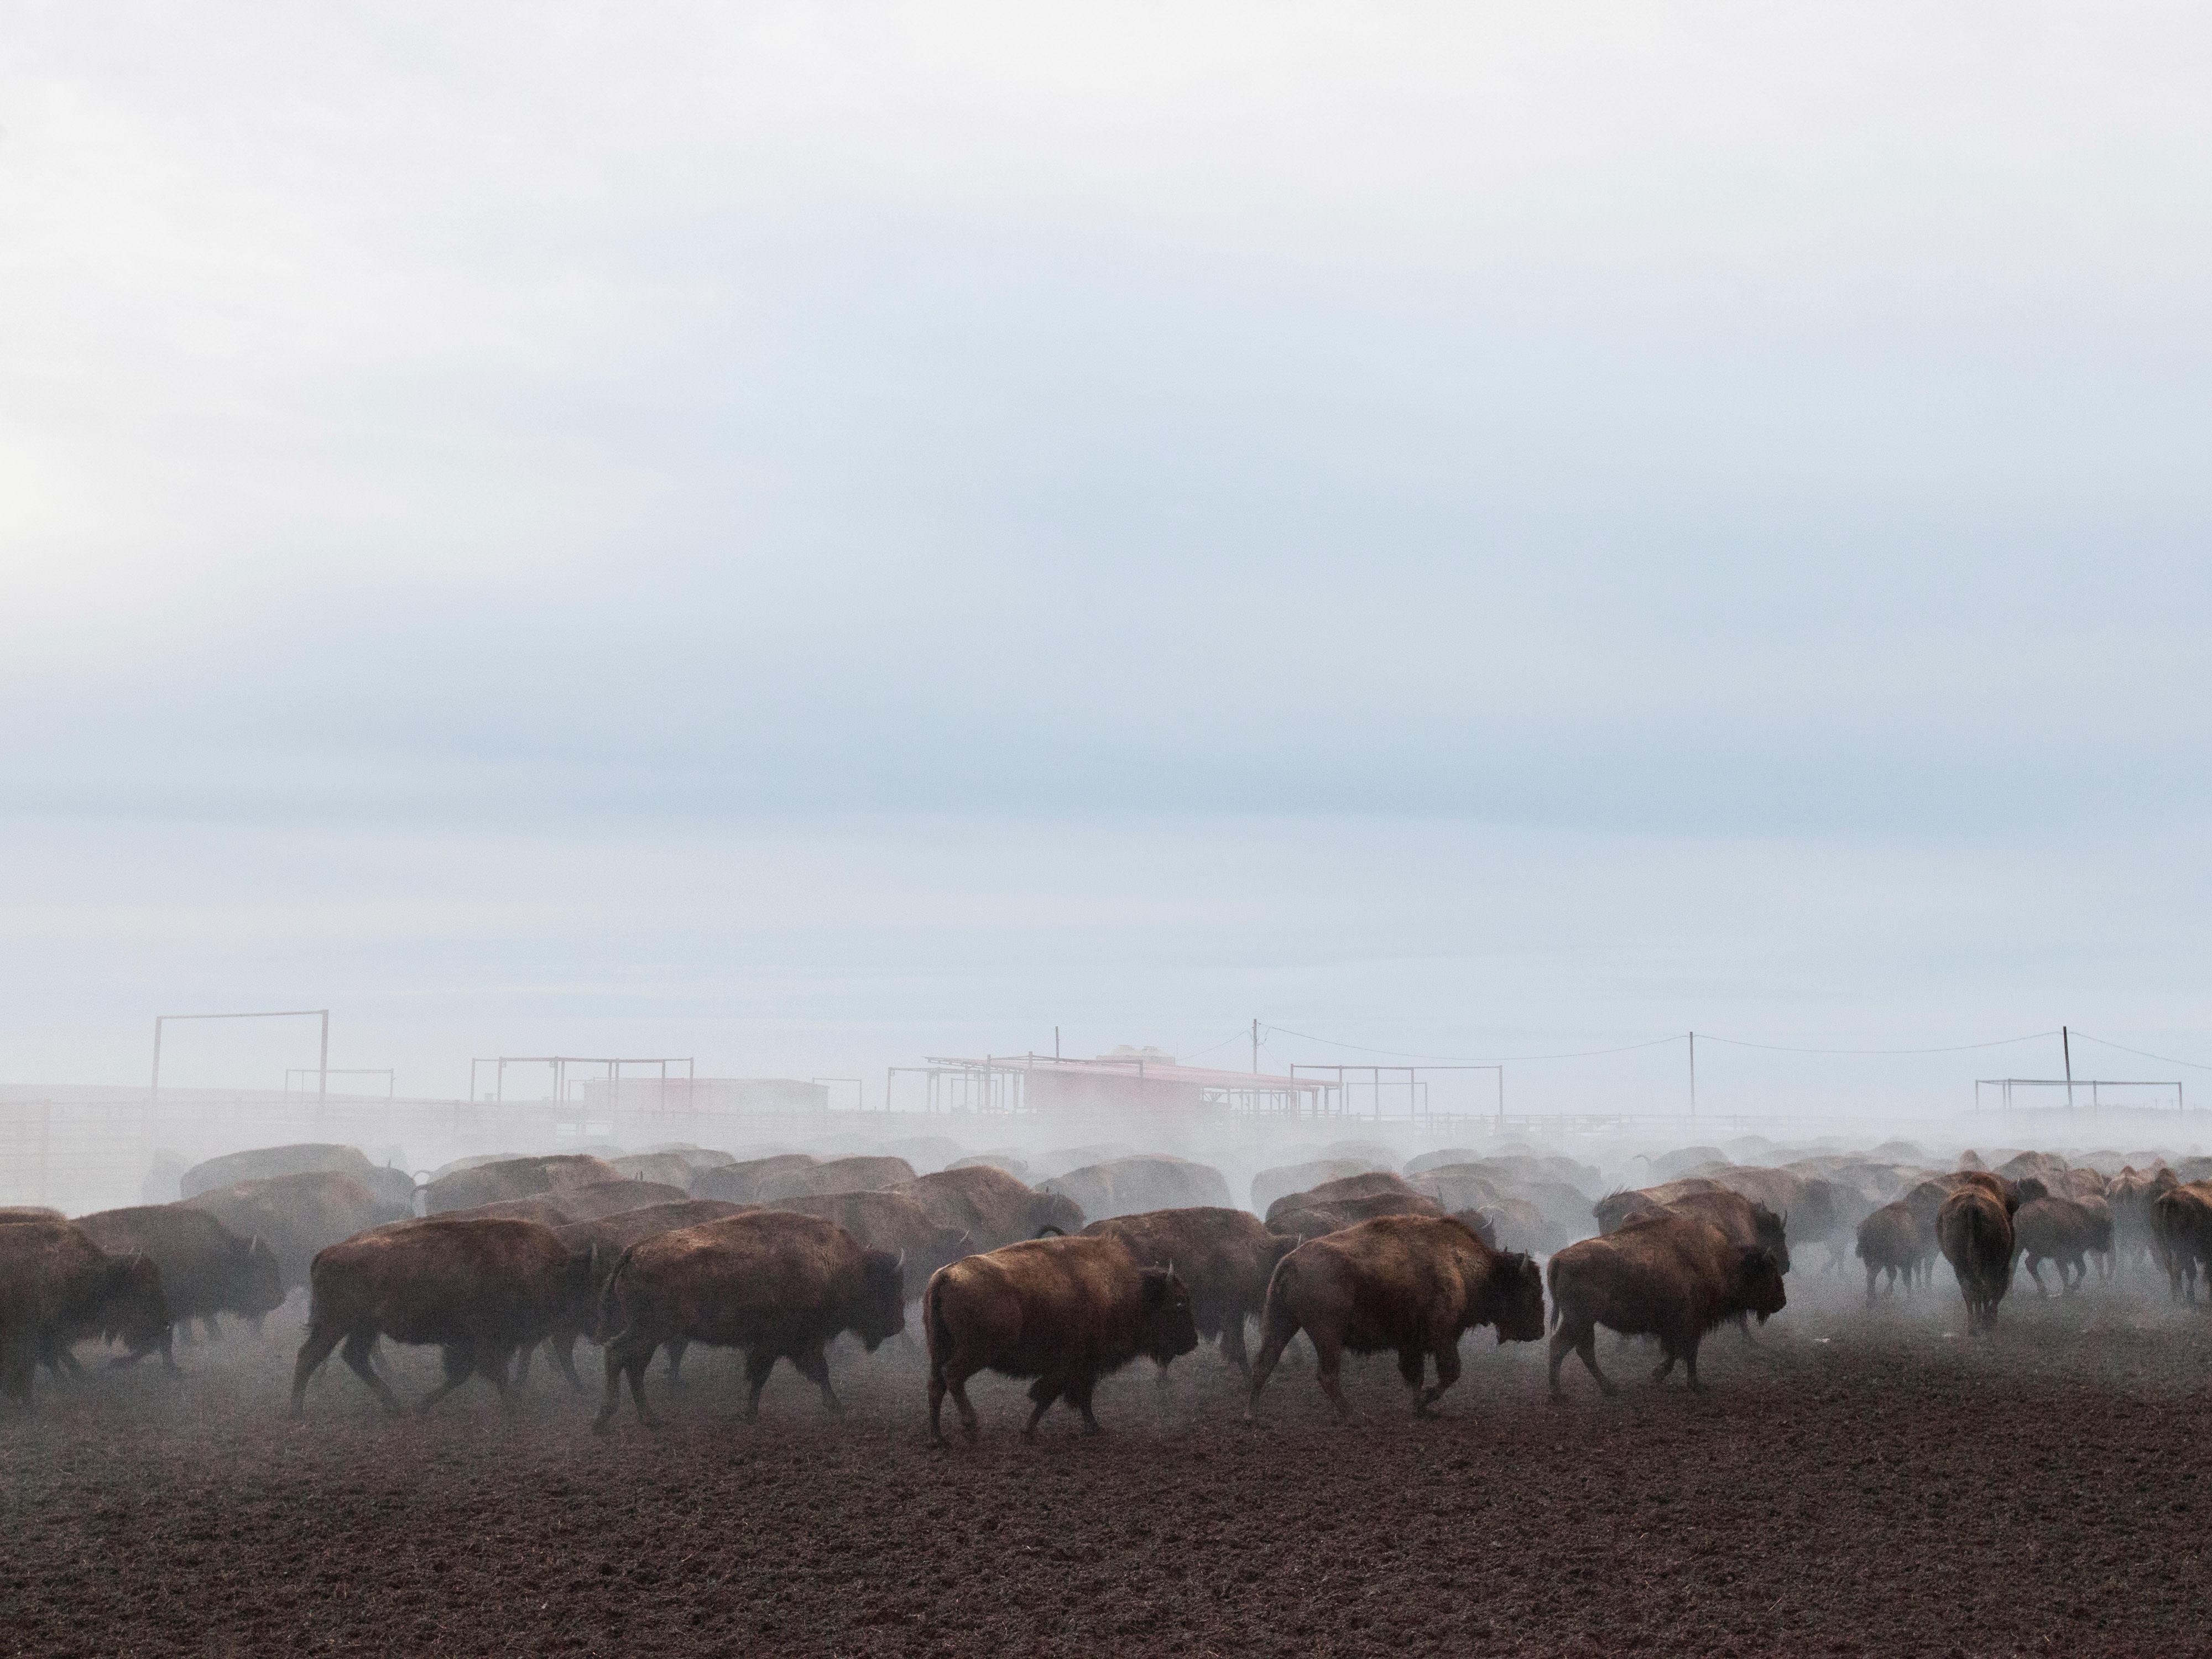 Bison in a holding corral in the mist